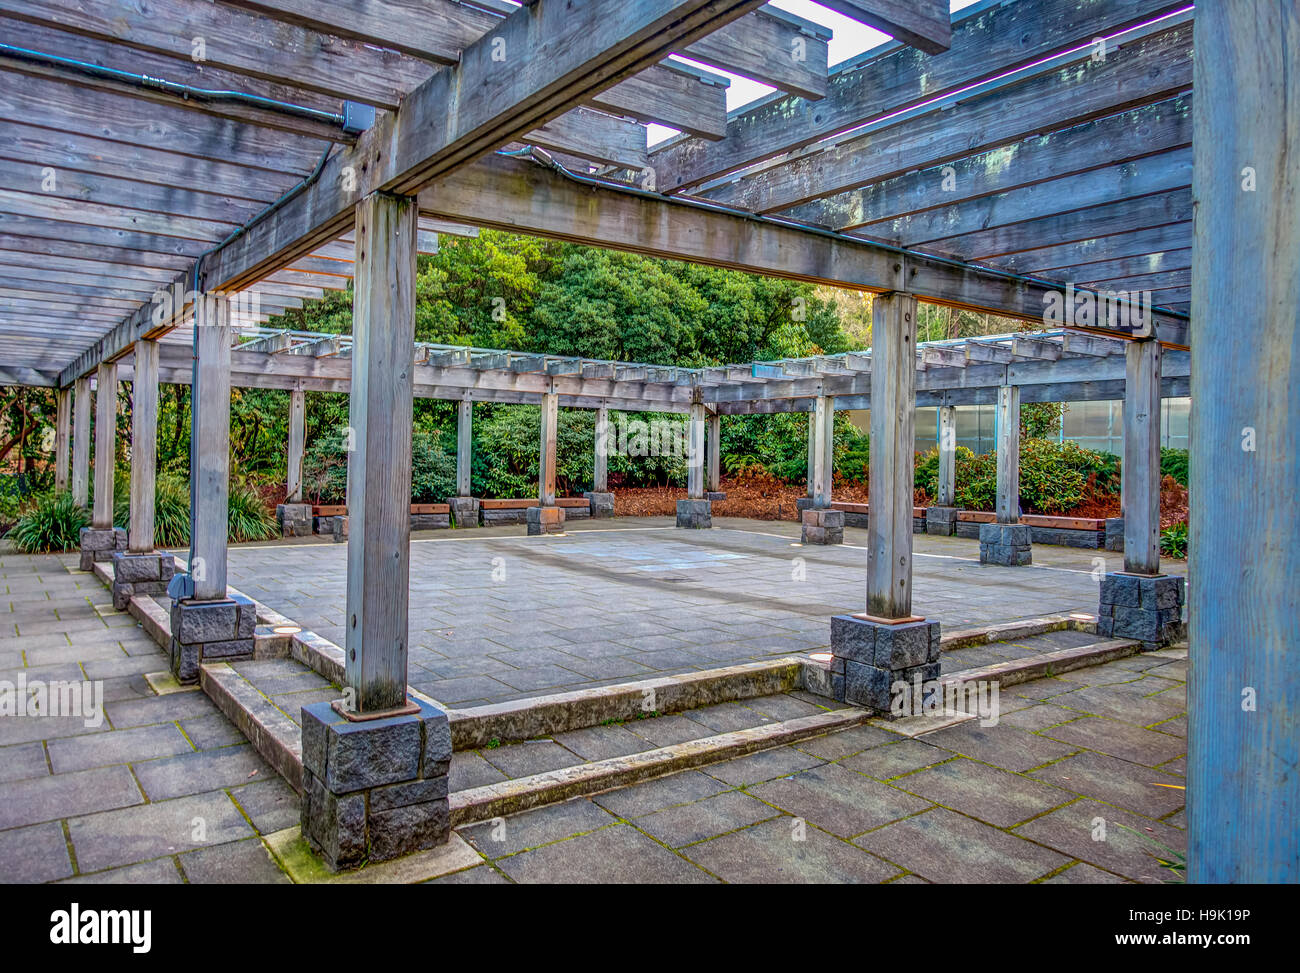 HDR image of a courtyard in Seattle, Washington. Stock Photo